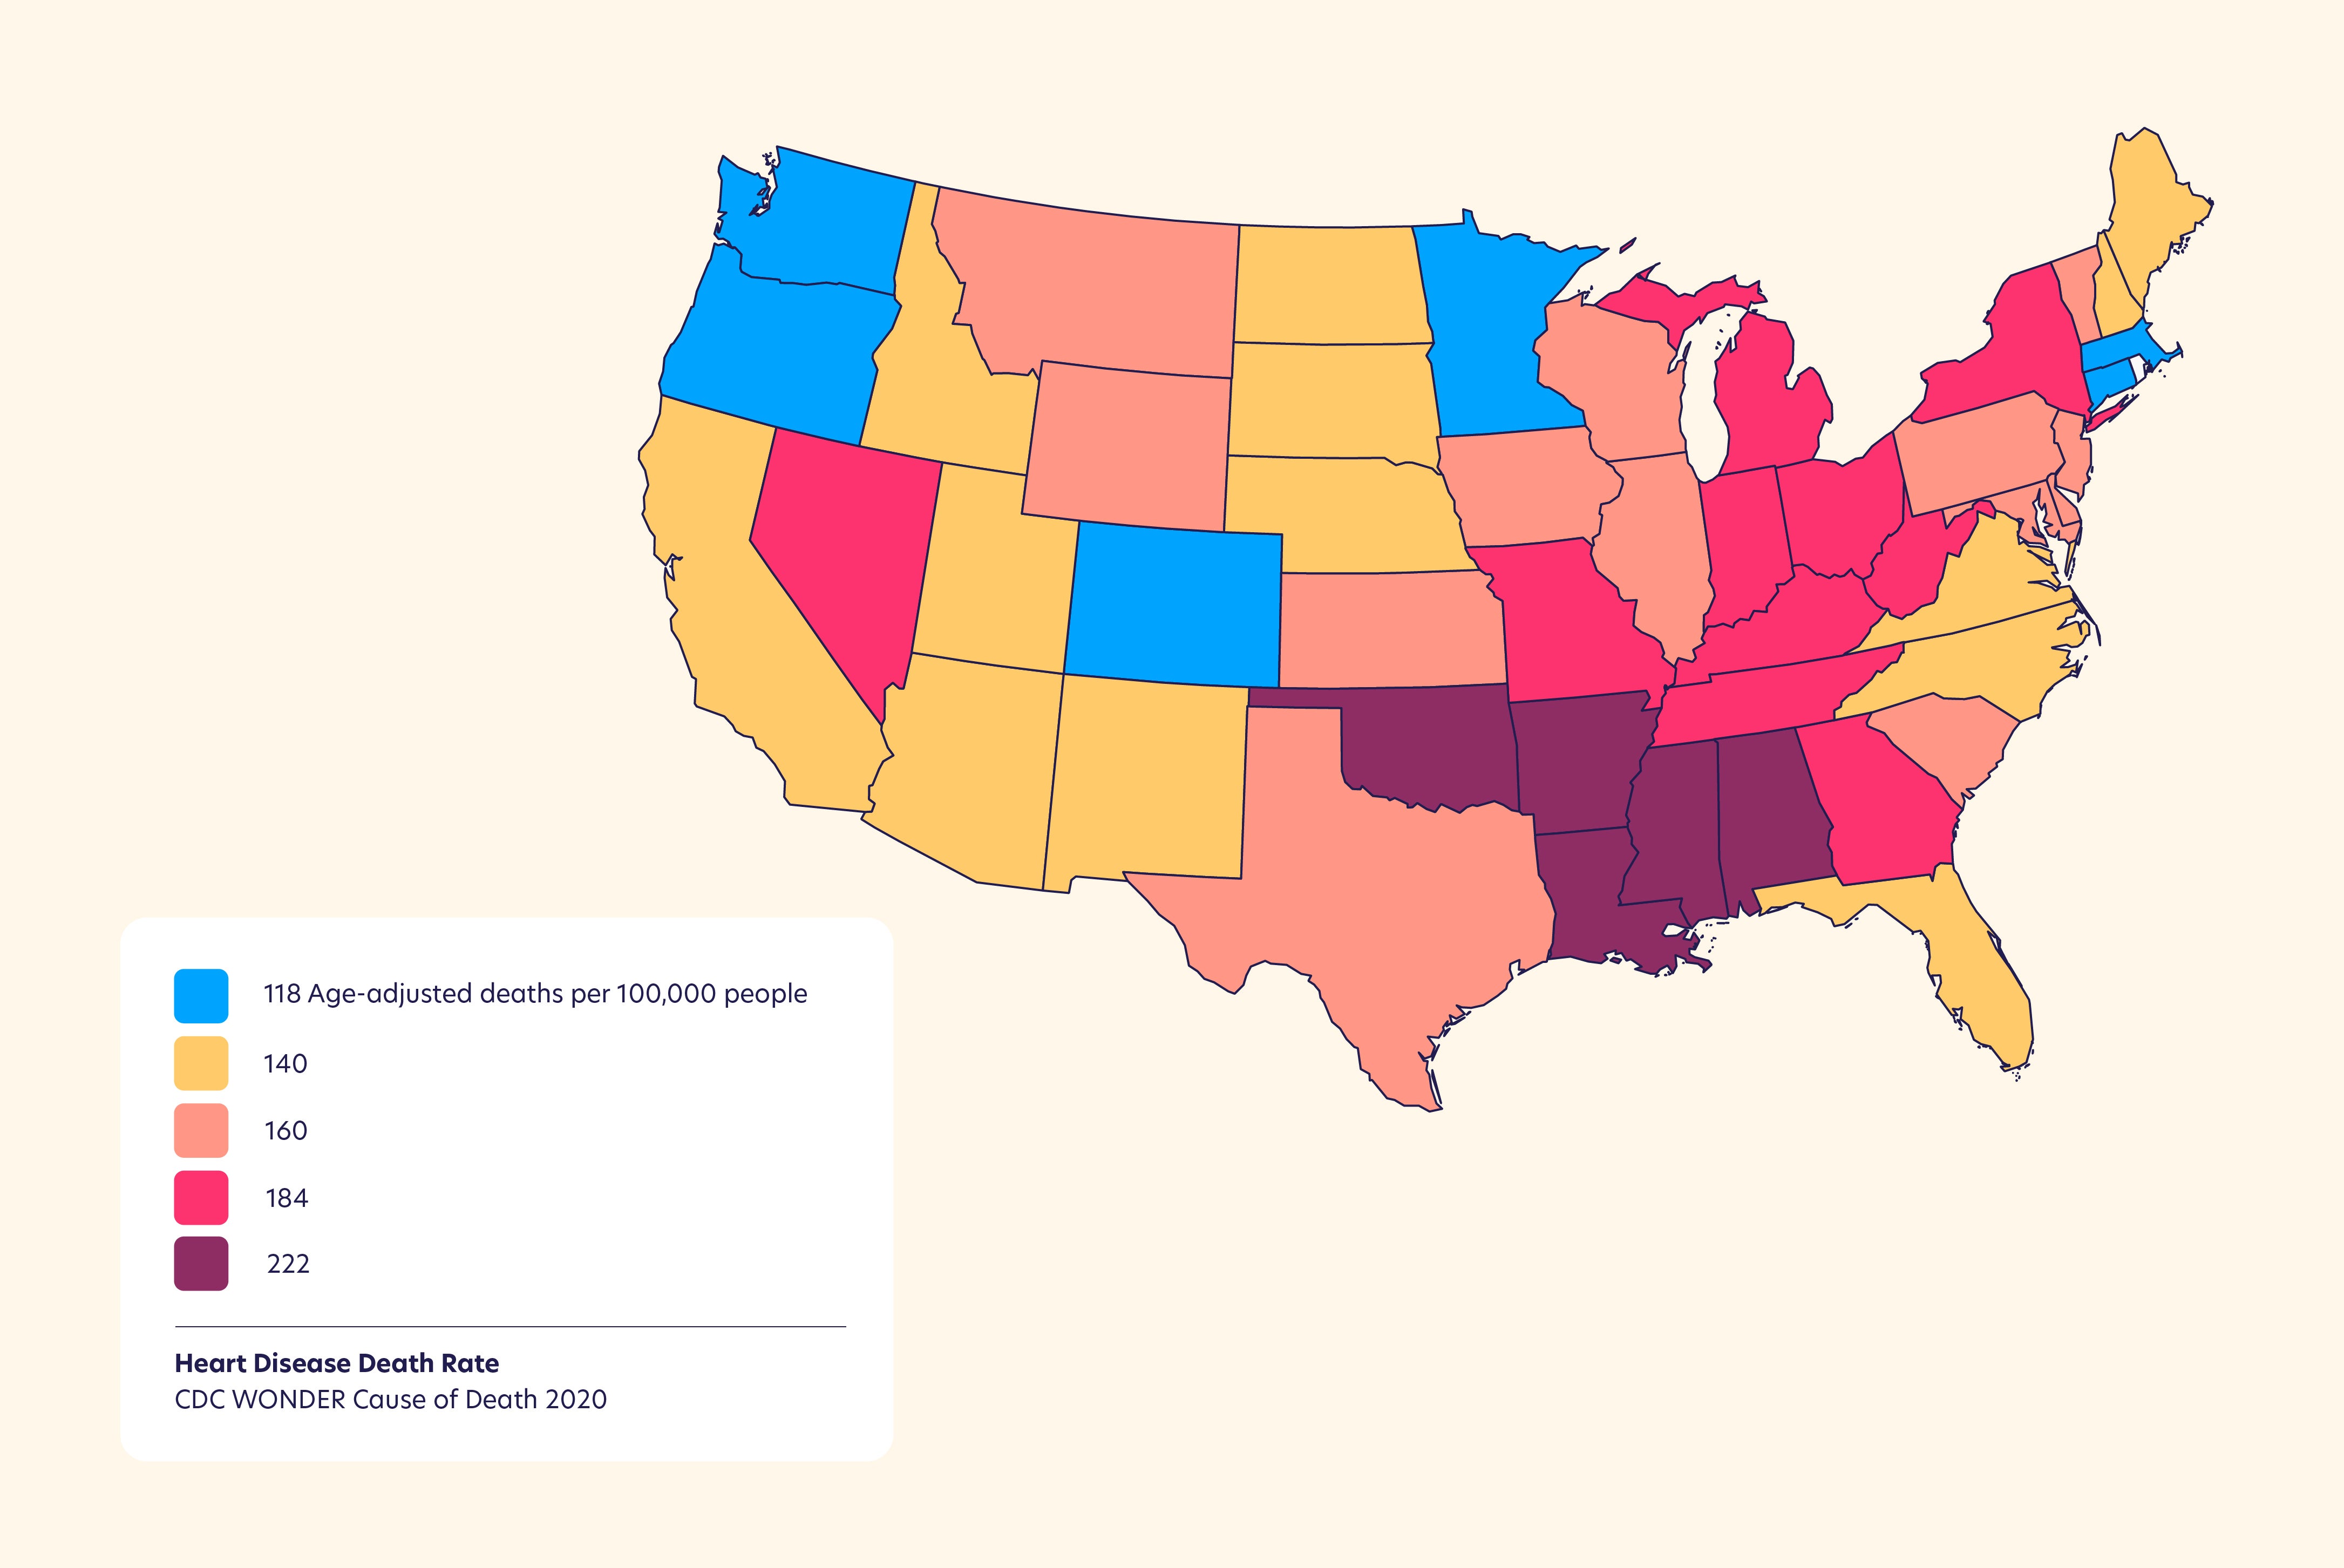 Map showing the rate of heart disease deaths across the US. The highest deaths are concentrated in the Southern US